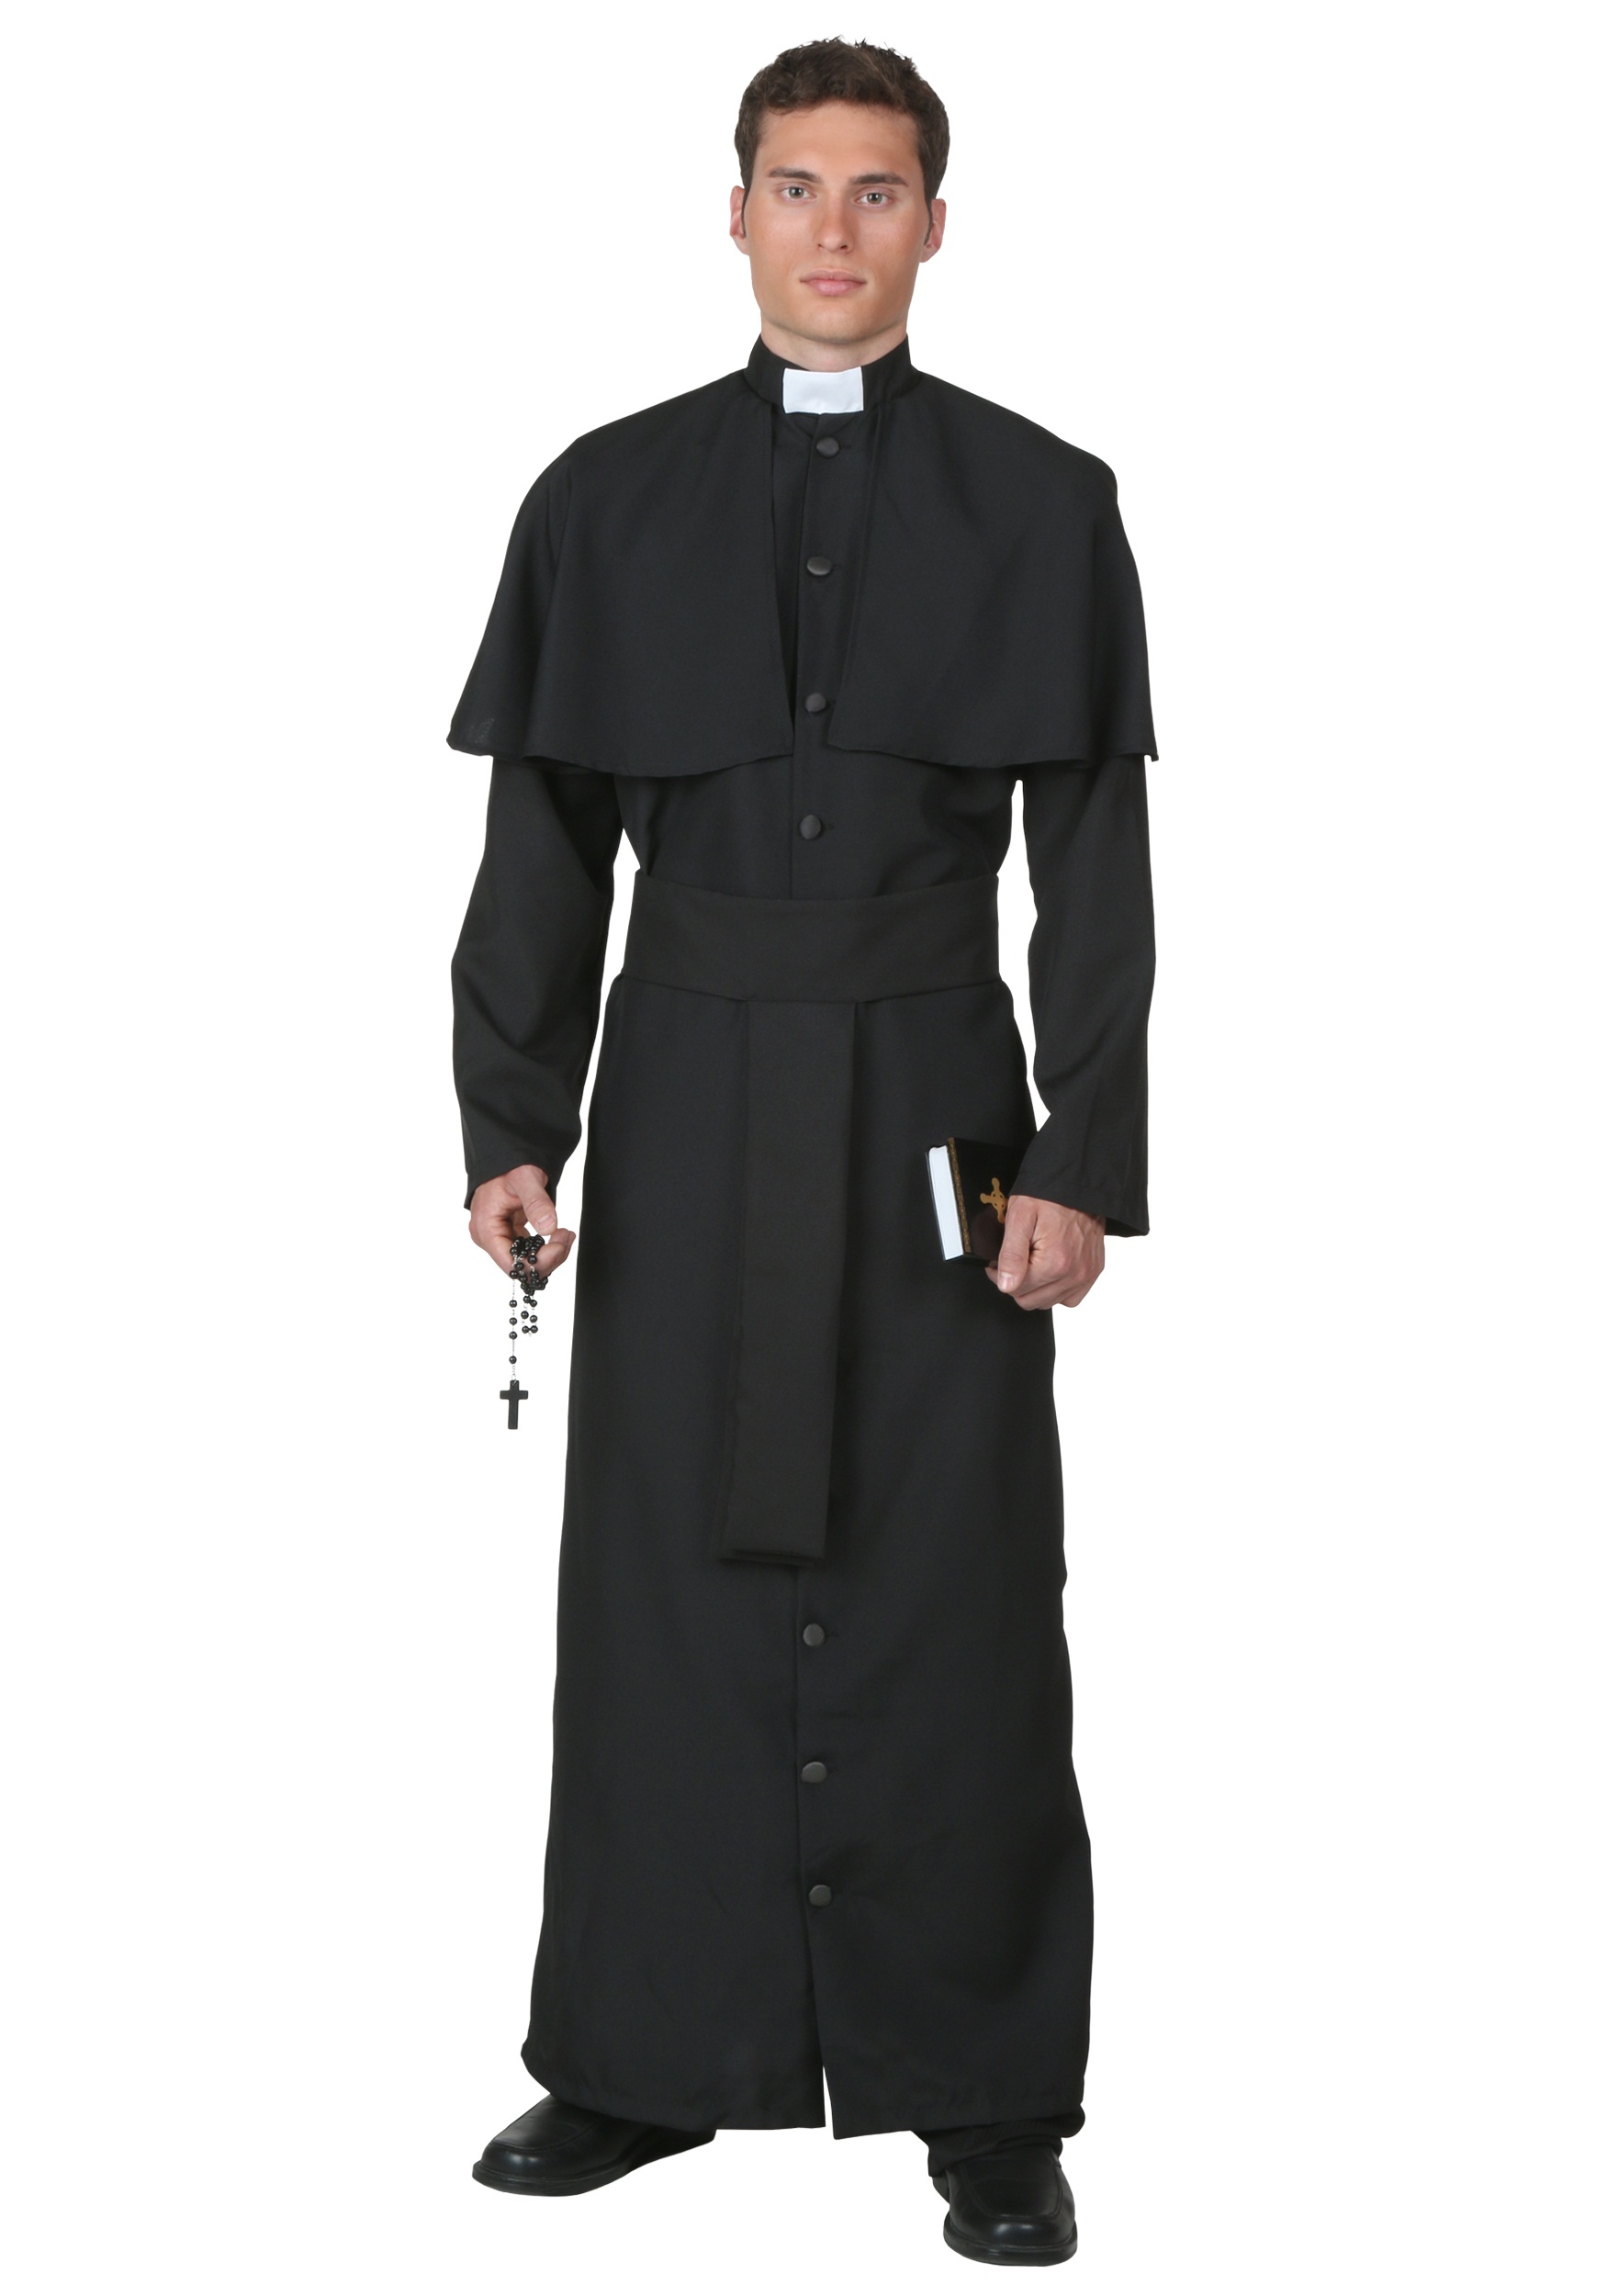 Male Nun Mens Fancy Dress Up Outfit Religious Church Costume Adult Inc Cross New Mode €2244